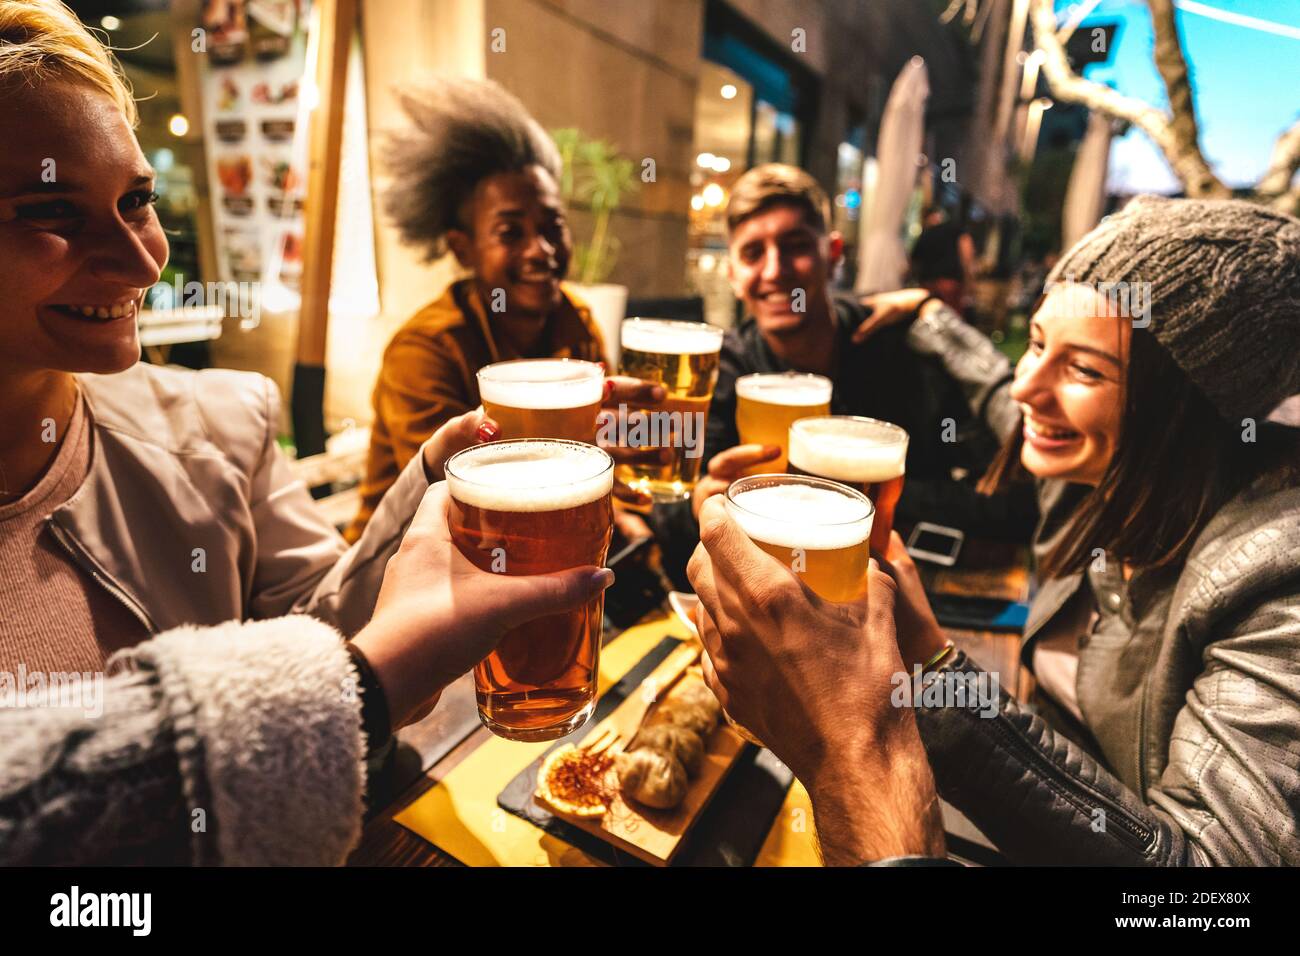 Happy friends drinking beer at brewery bar out doors on night mood - Friendship lifestyle concept with young people enjoying time together Stock Photo